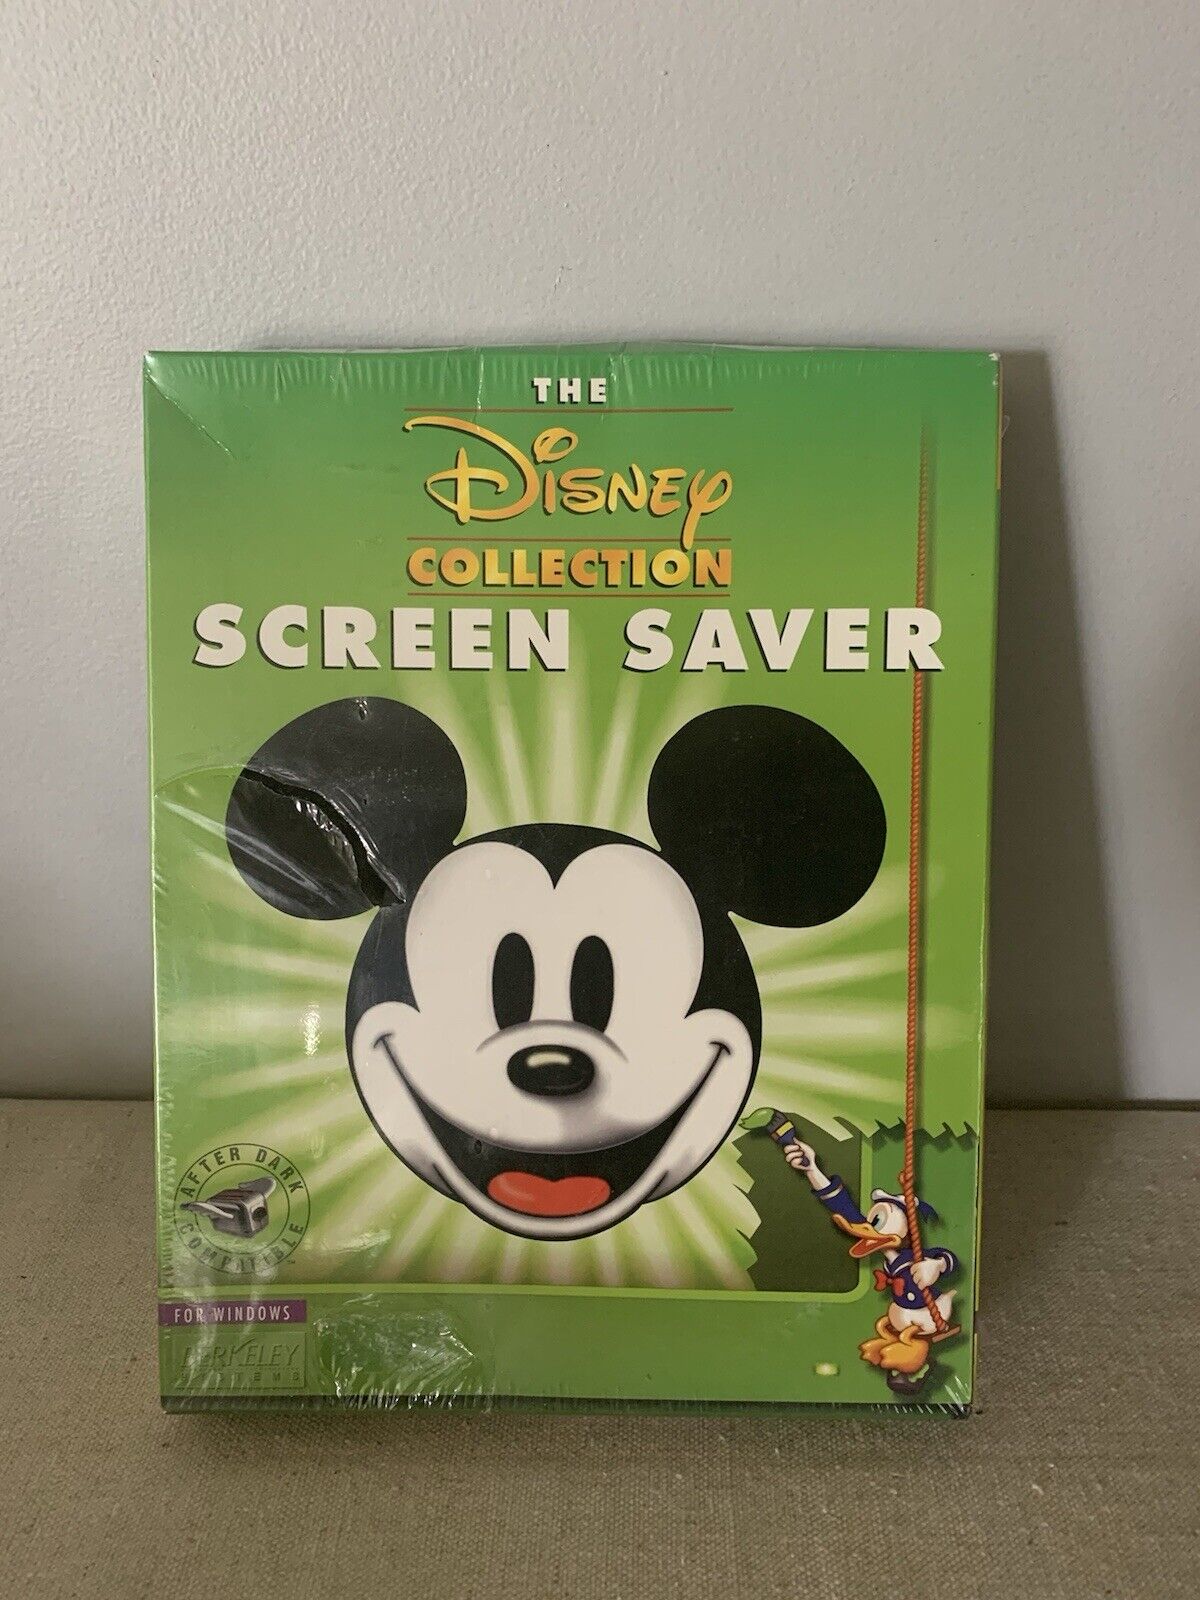 Vintage The Disney Collection Screen Saver for Windows PC 1993- Sealed